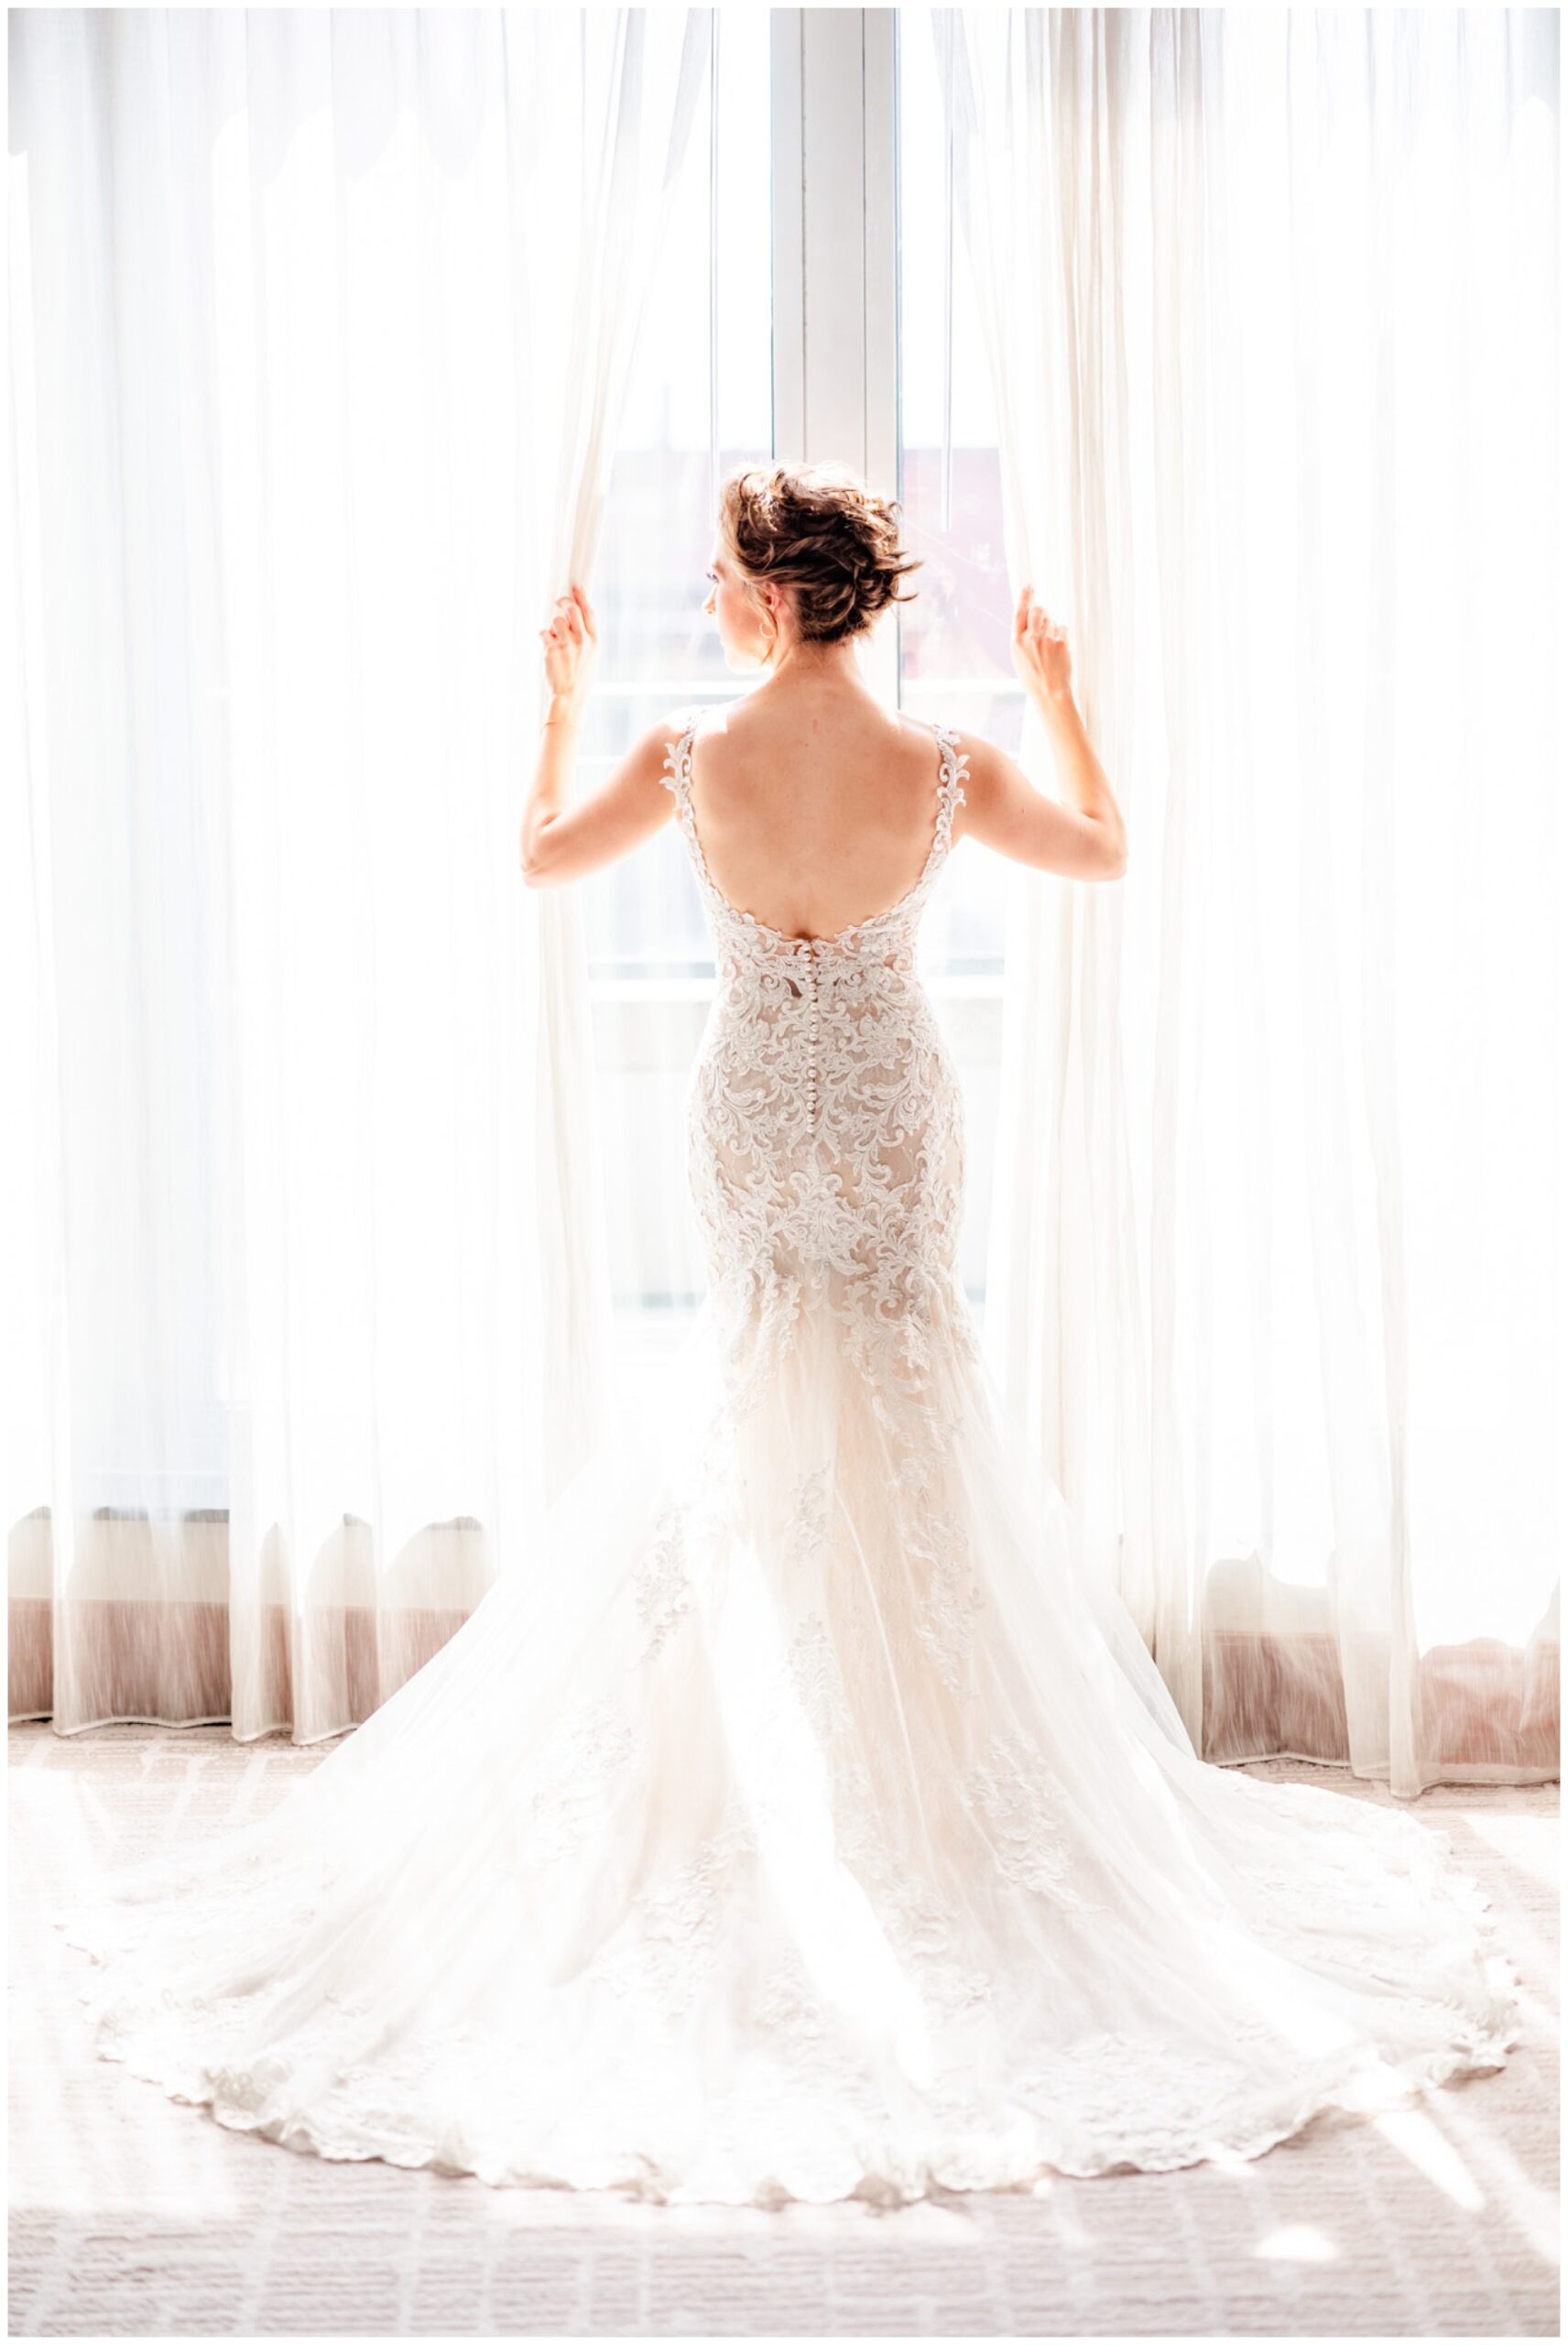 romantic Ritz Carlton Georgetown wedding, summer wedding aesthetic, green and white aesthetic, summer D.C. wedding, D.C. wedding venues, Ritz Carlton wedding, Washington D.C. wedding, romantic wedding aesthetic, Georgetown wedding, Rachel E.H. Photography, D.C. photographer, bride opening window curtains